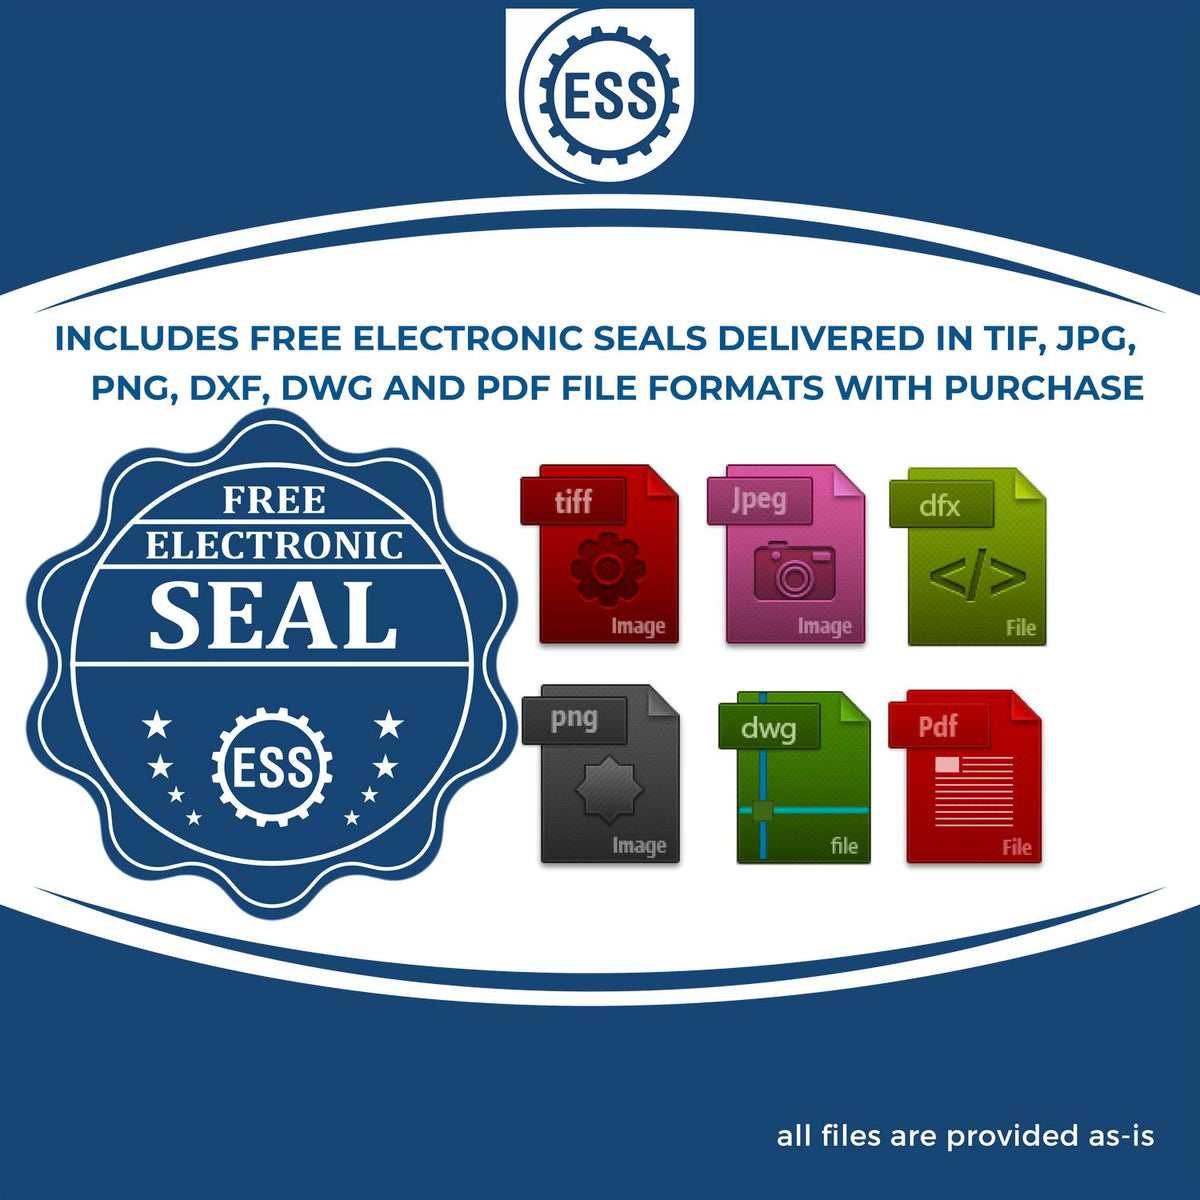 An infographic for the free electronic seal for the Connecticut Desk Architect Embossing Seal illustrating the different file type icons such as DXF, DWG, TIF, JPG and PNG.